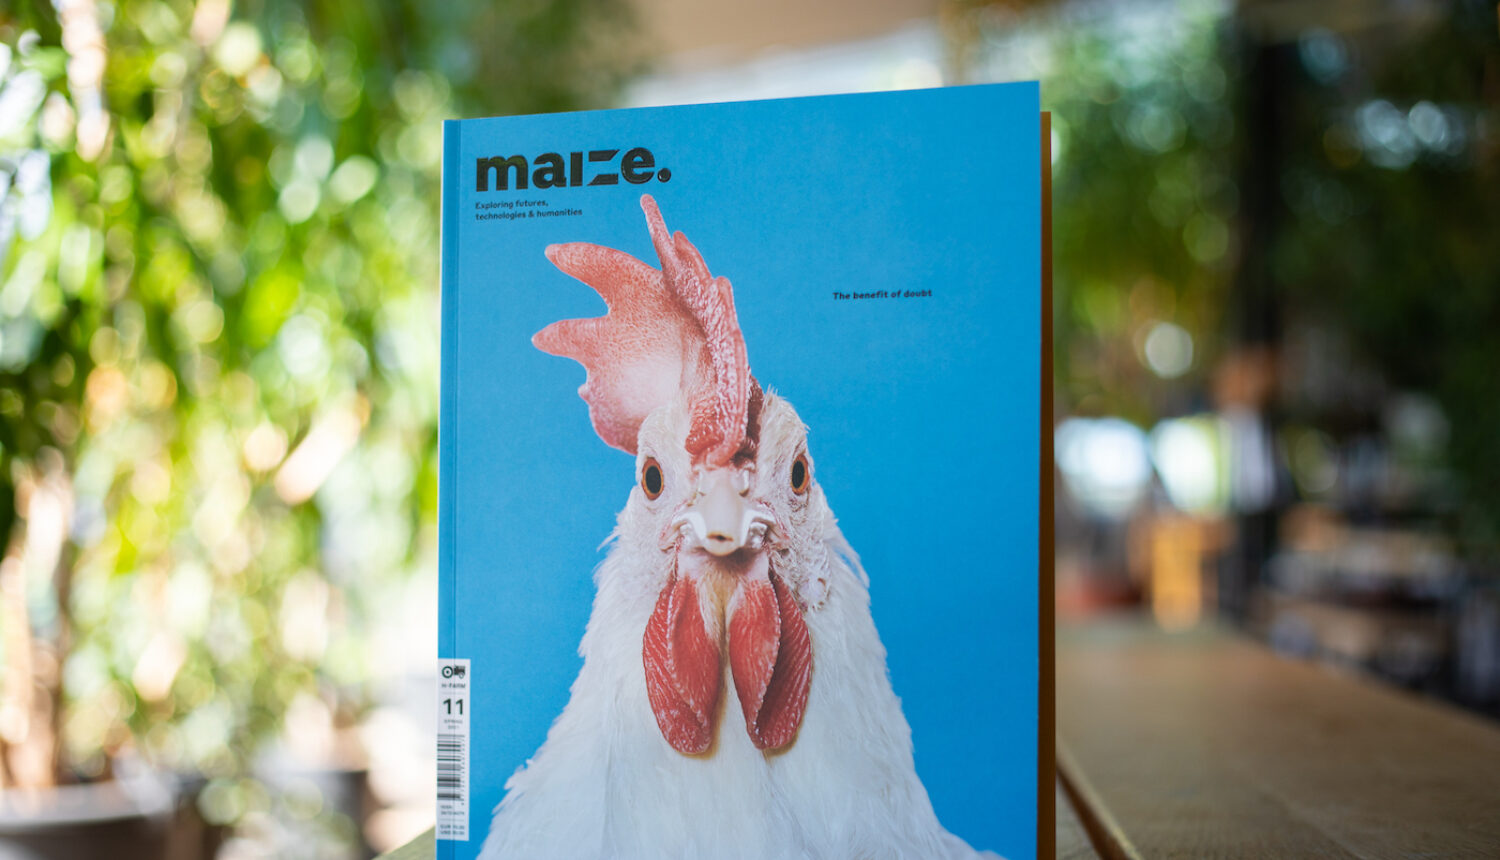 maize.MAGAZINE n.11: The benefit of doubt